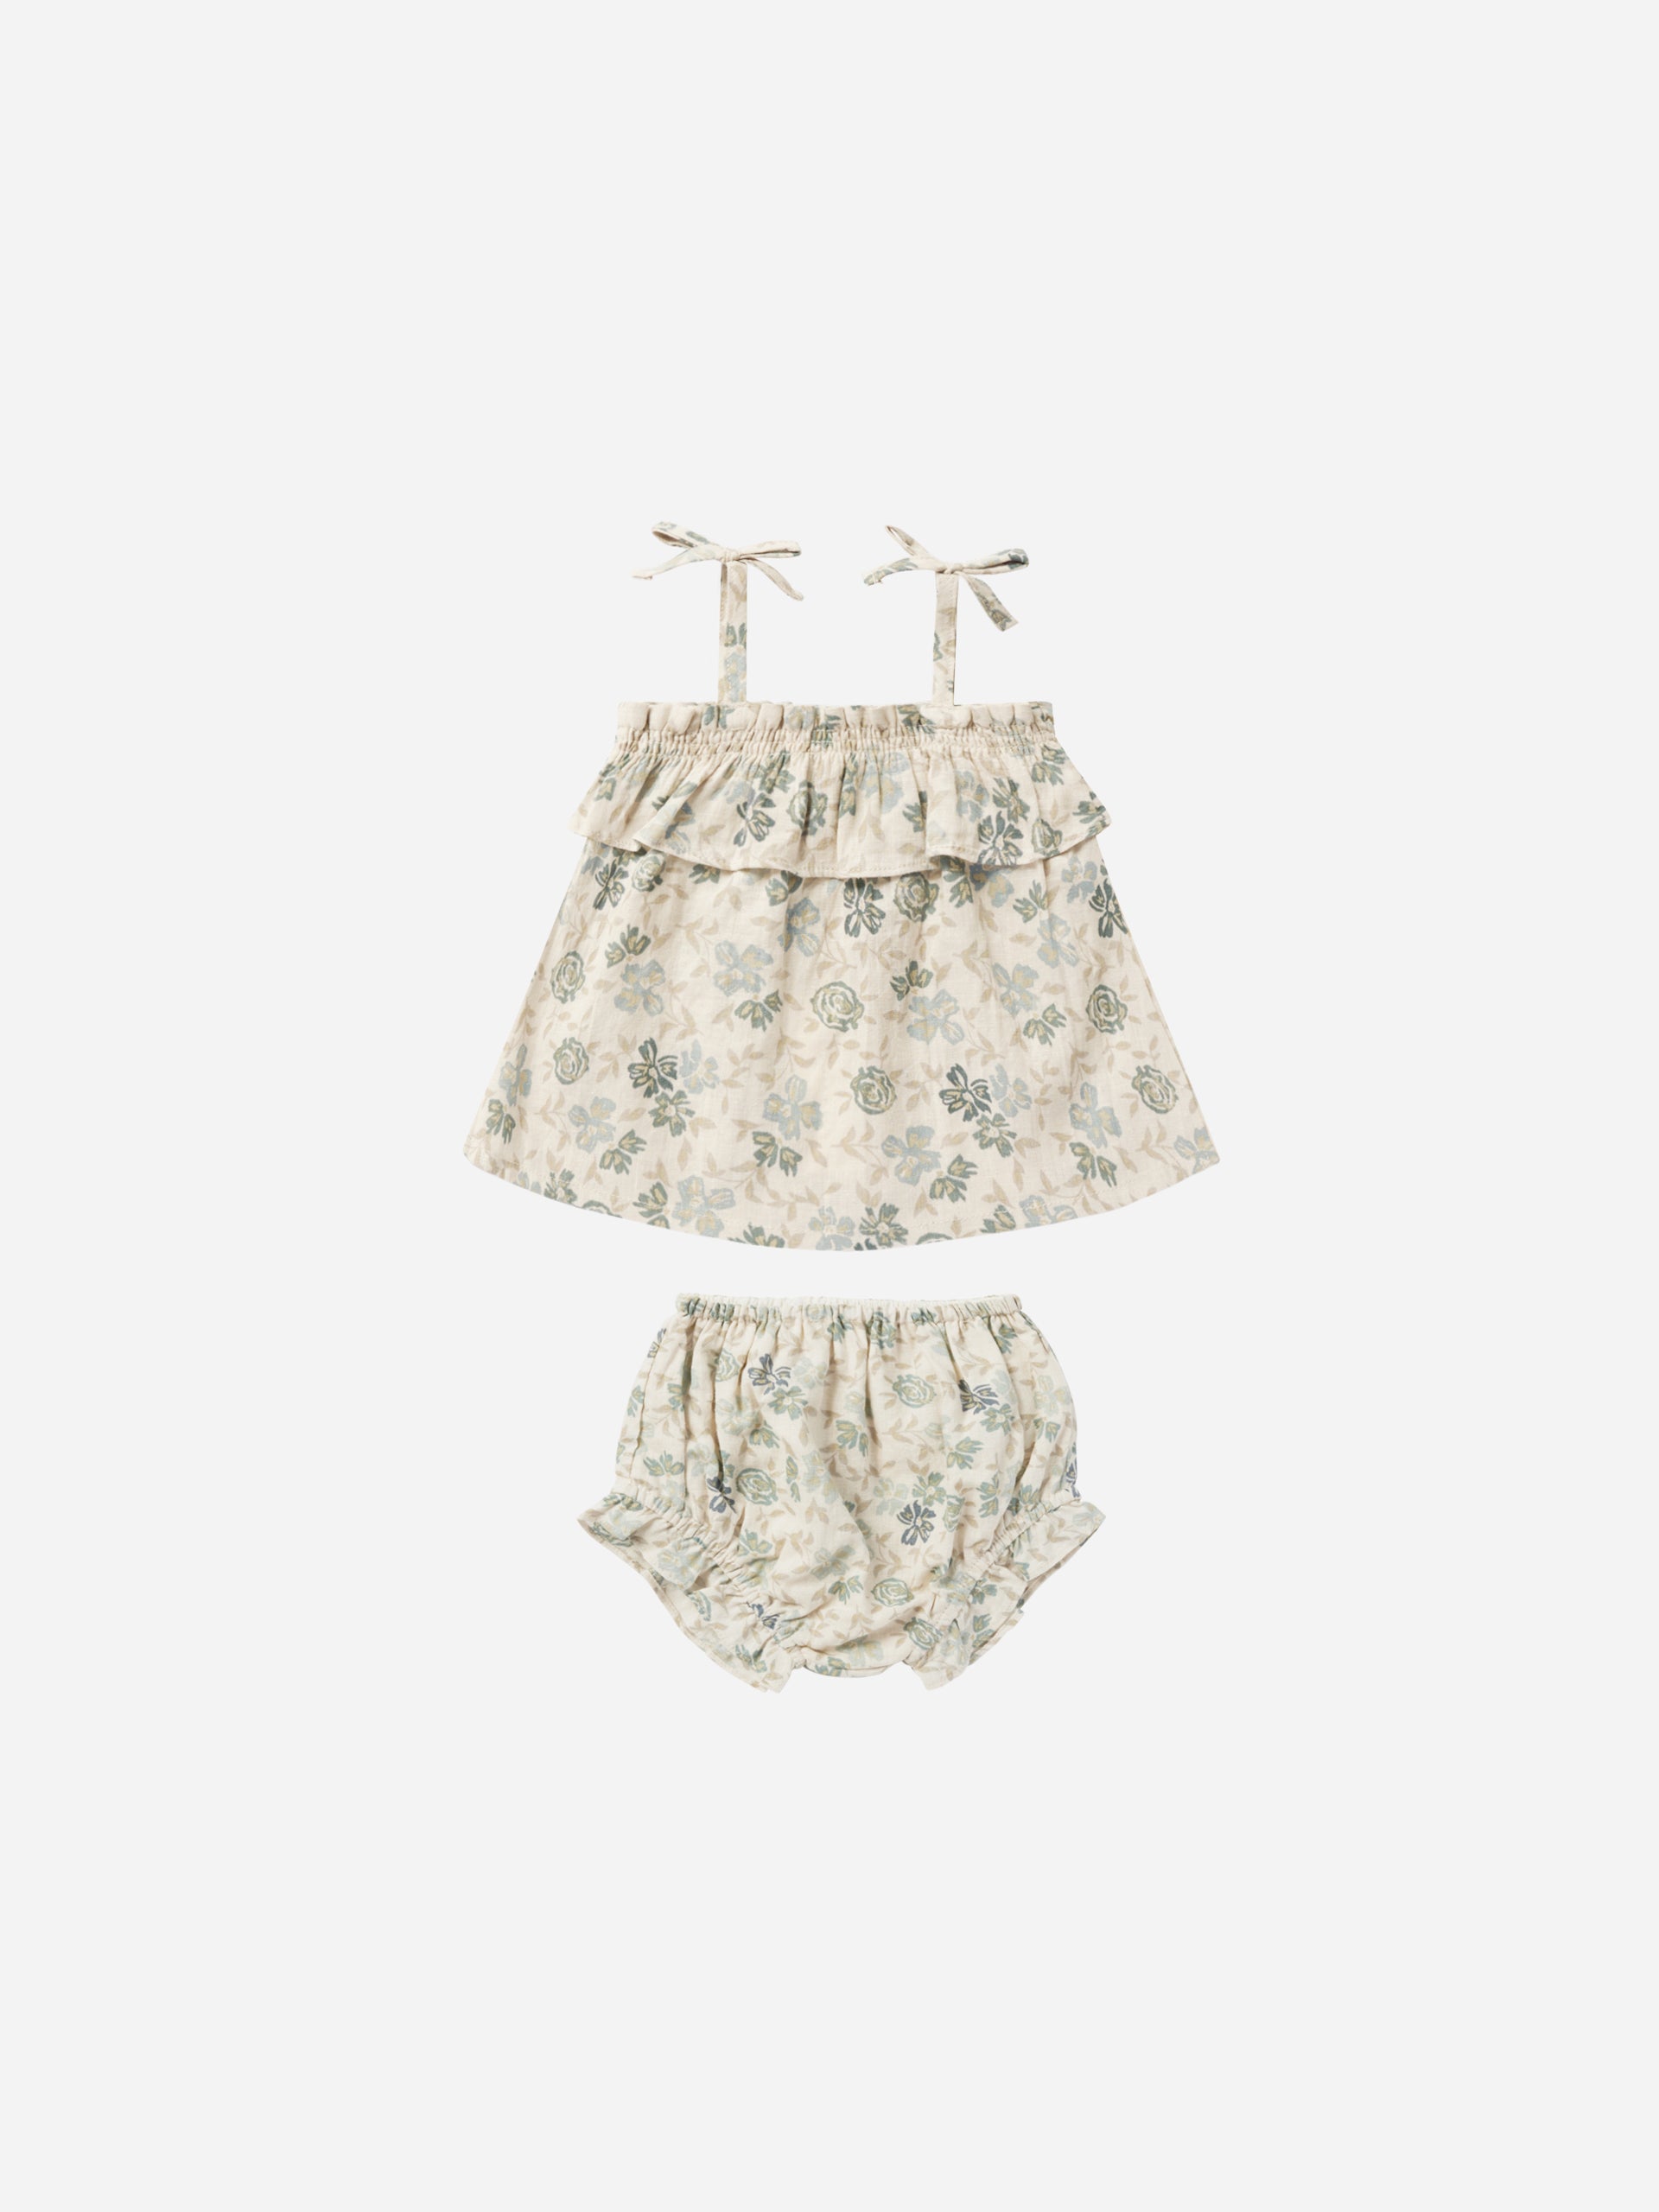 Ruffle Tube Top Set || Blue Floral - Rylee + Cru | Kids Clothes | Trendy Baby Clothes | Modern Infant Outfits |